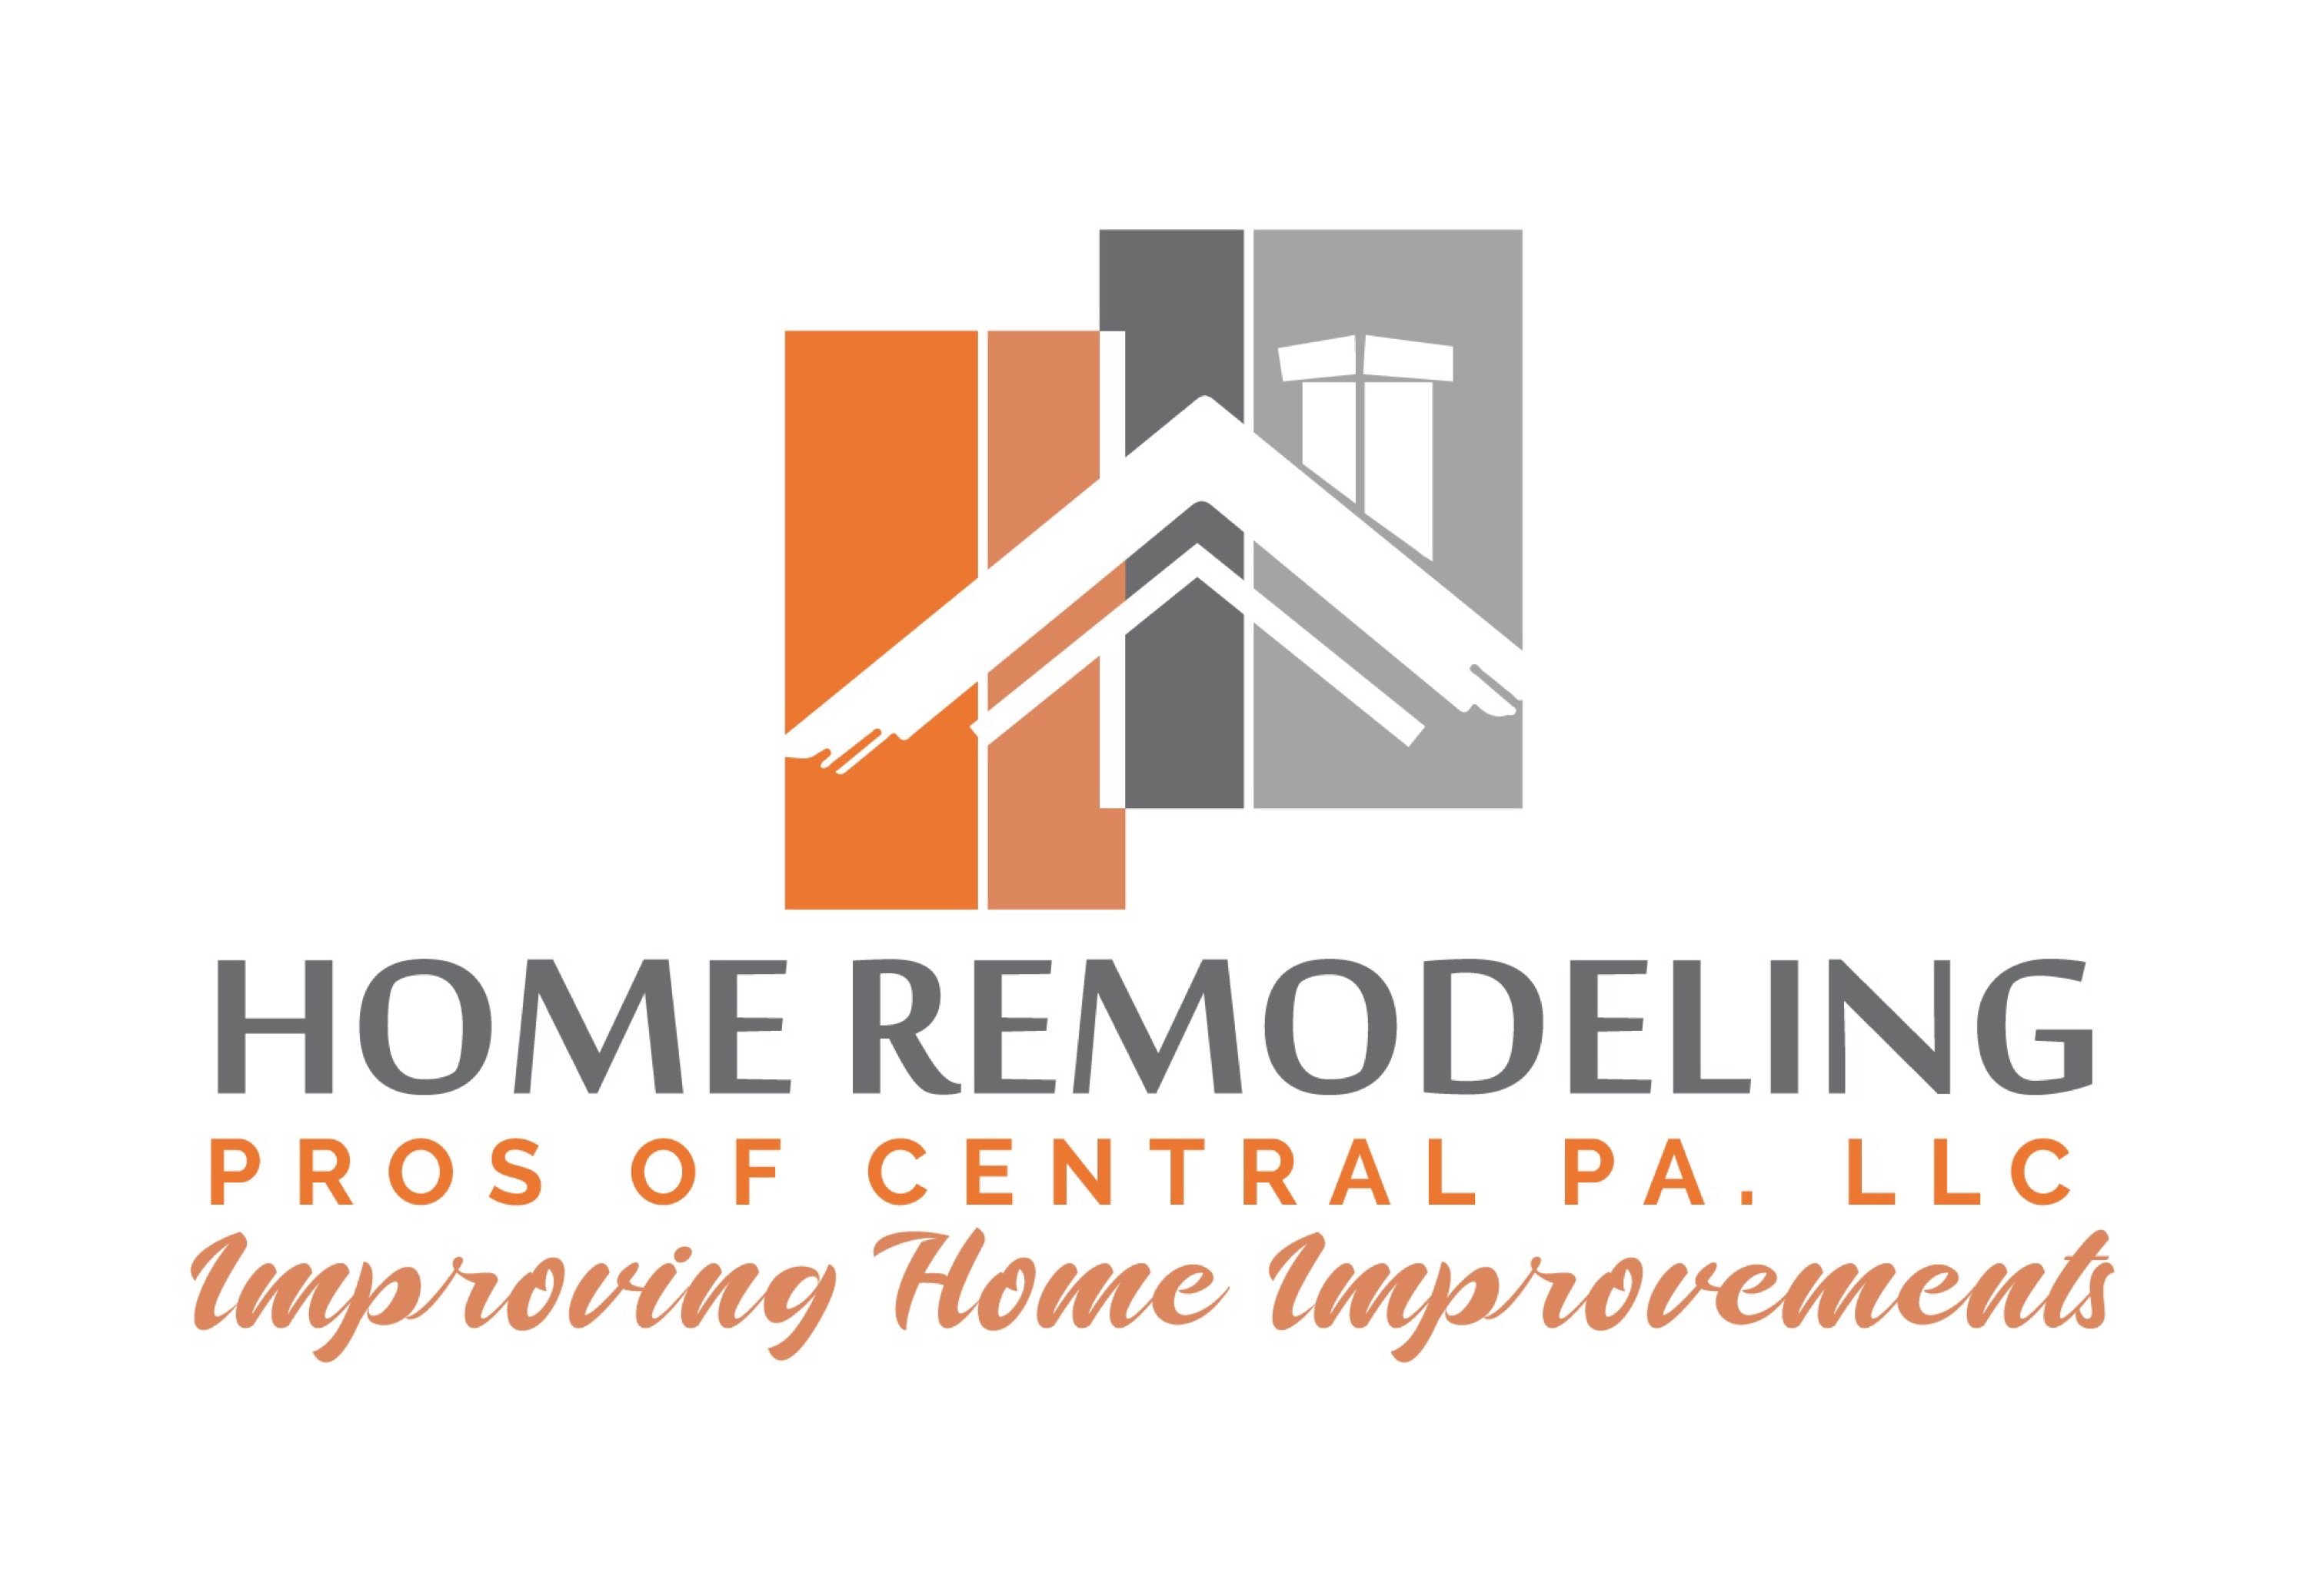 Home Remodeling Pros of Central PA, LLC Logo